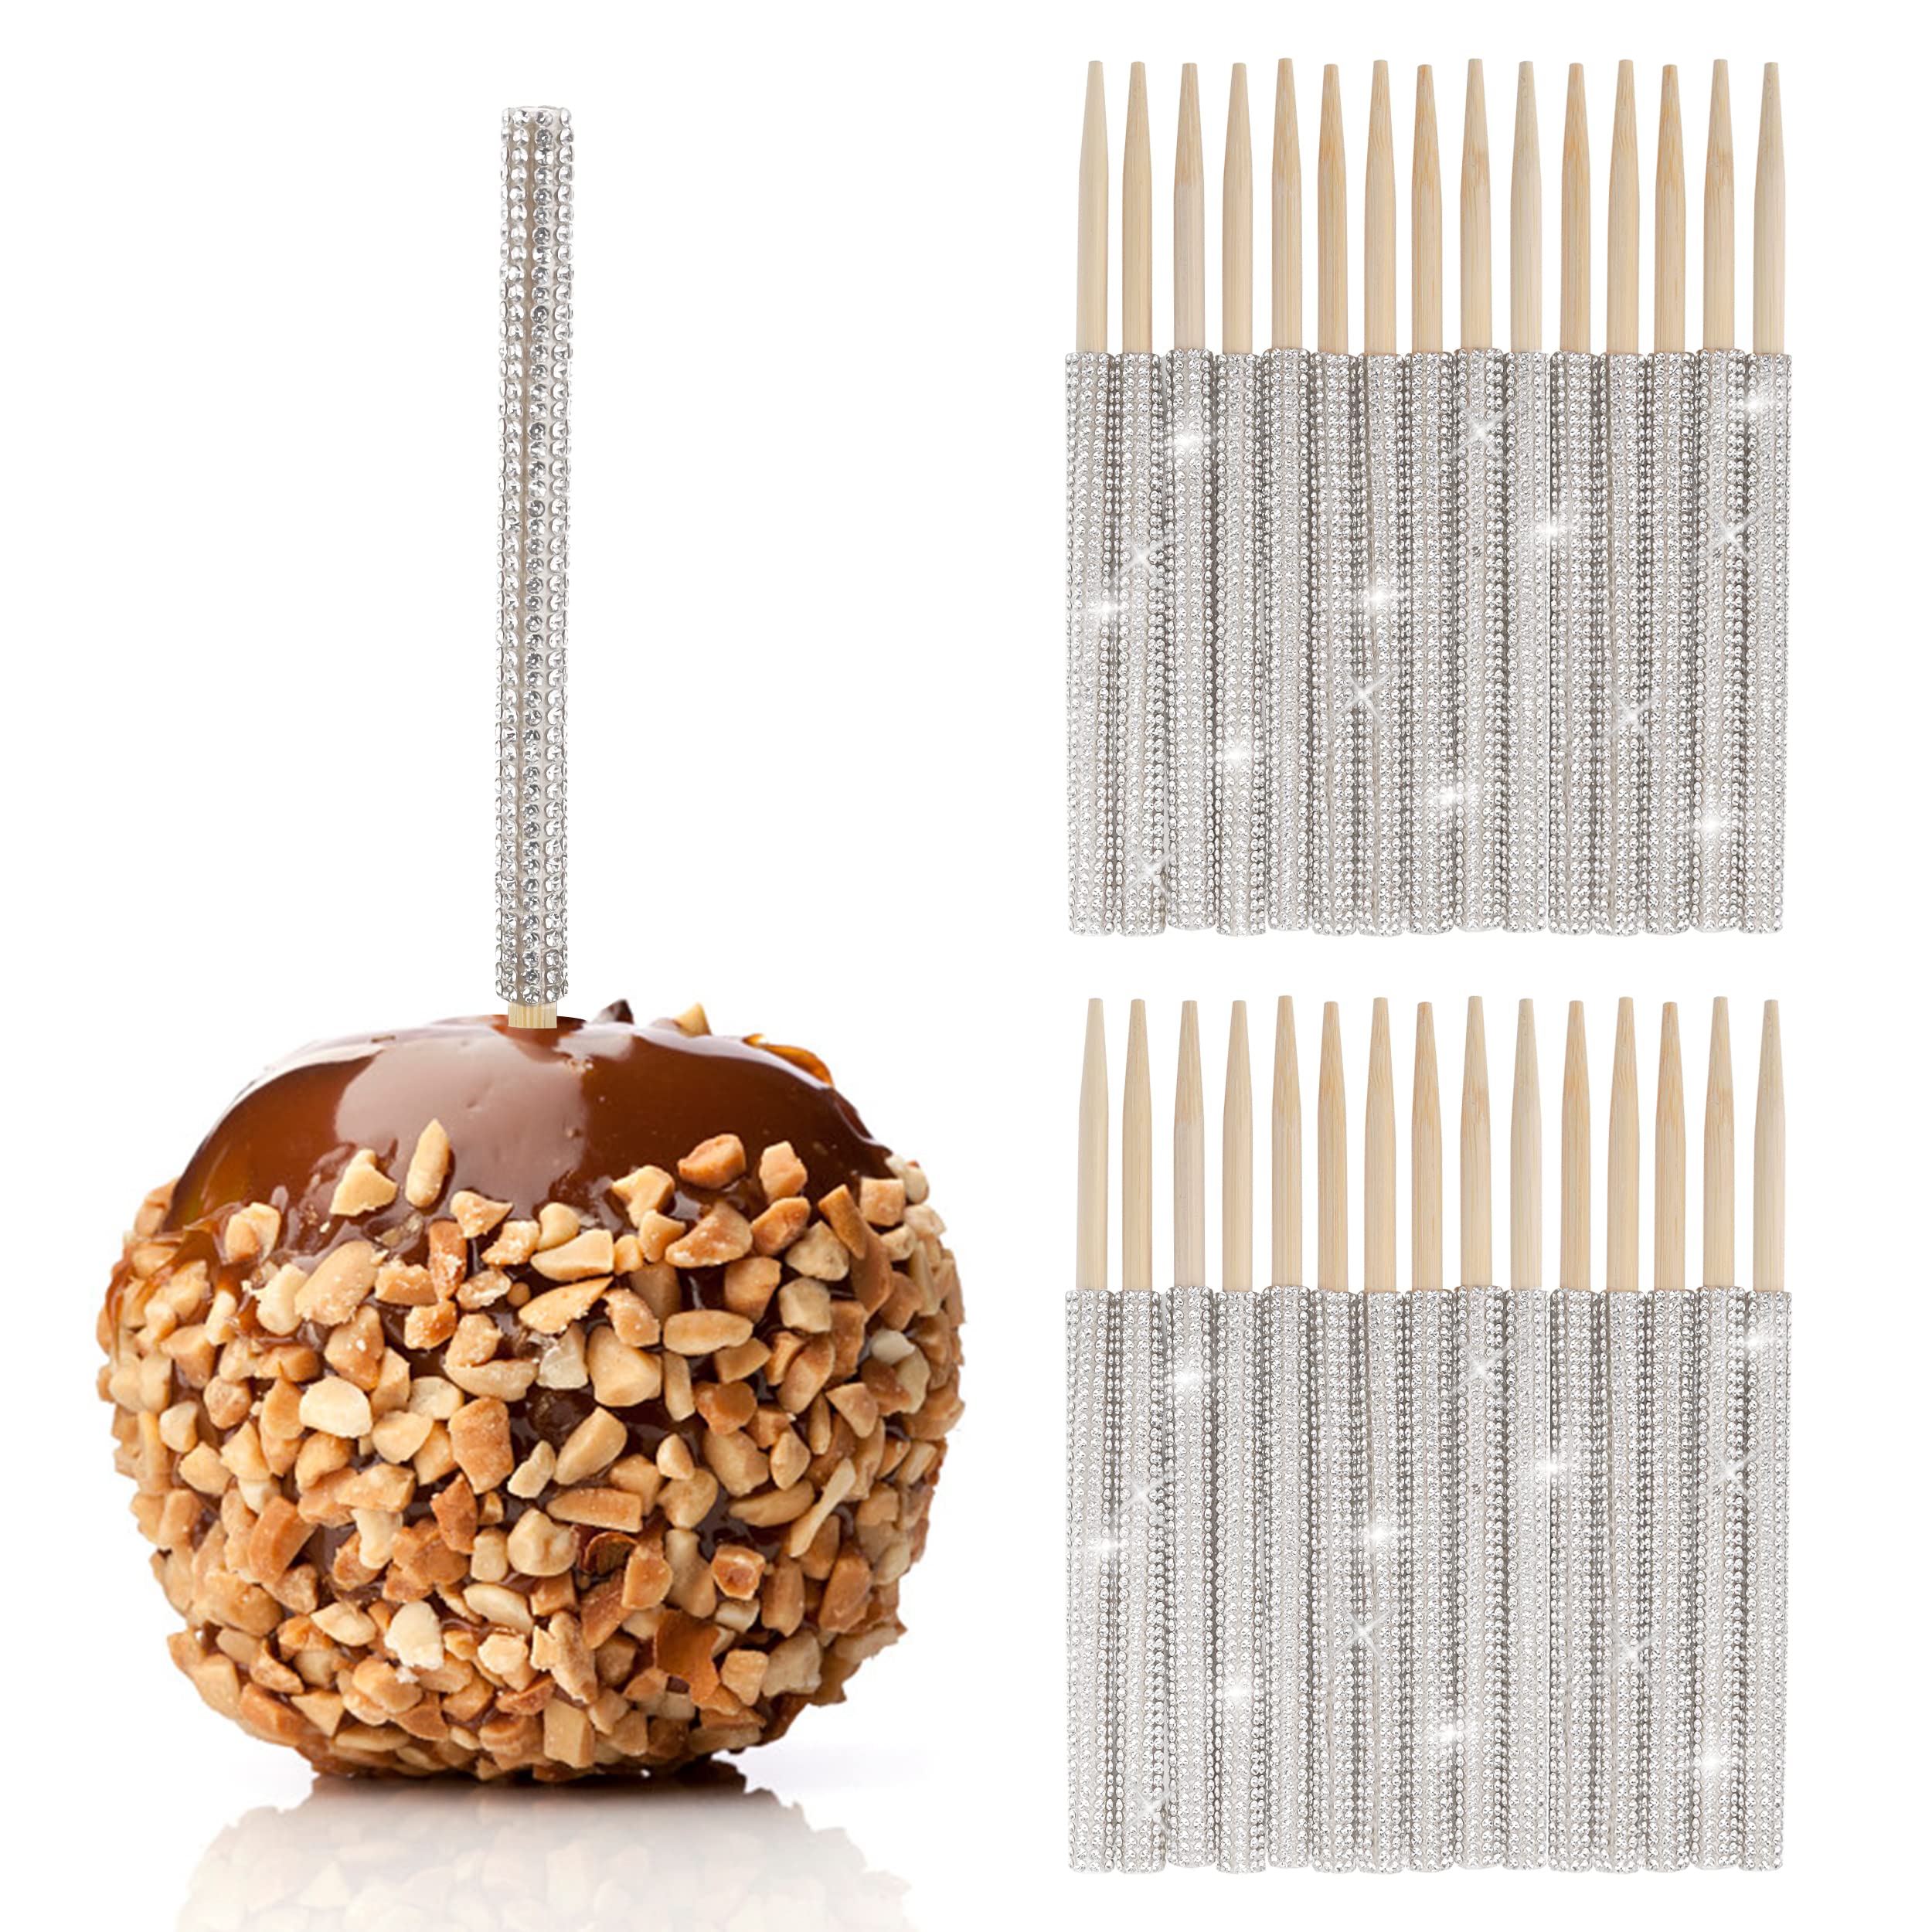 LOKQING 30Set 5.9IN Bling Candy Apple Sticks Kit,Caramel Apple Bamboo Skewers Rhinestone Sticks for Lollipop Cake Pop Candy Making Buffet Party Favor (SILVER)